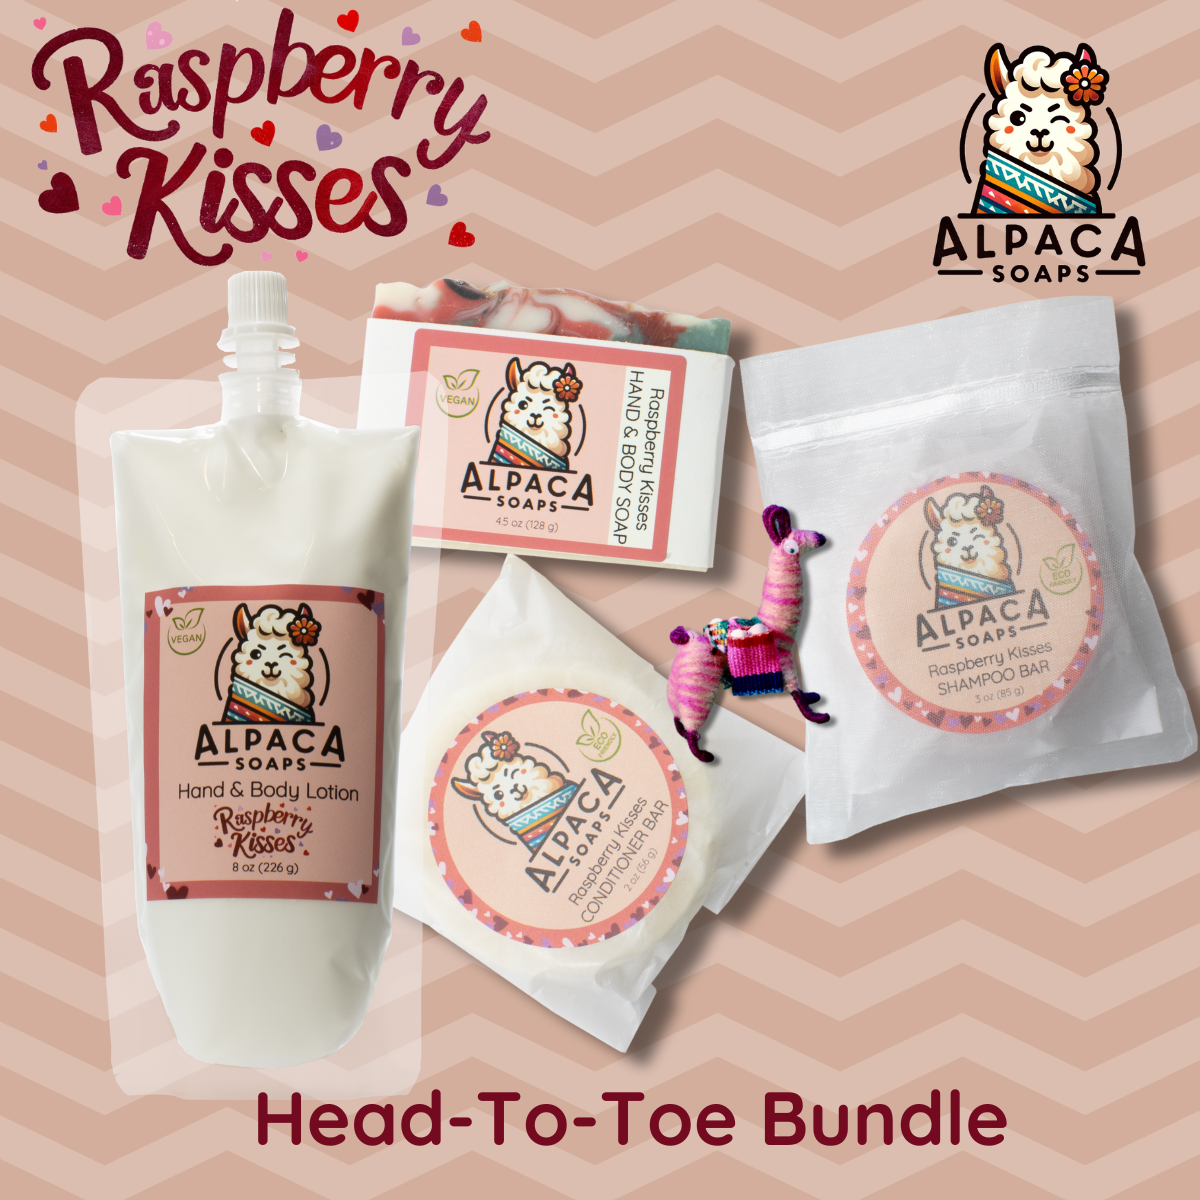 Head to Toe Bundle with shampoo, conditioner bar, soap, lotion and an alpaca key chain. Flat lay on a pink background